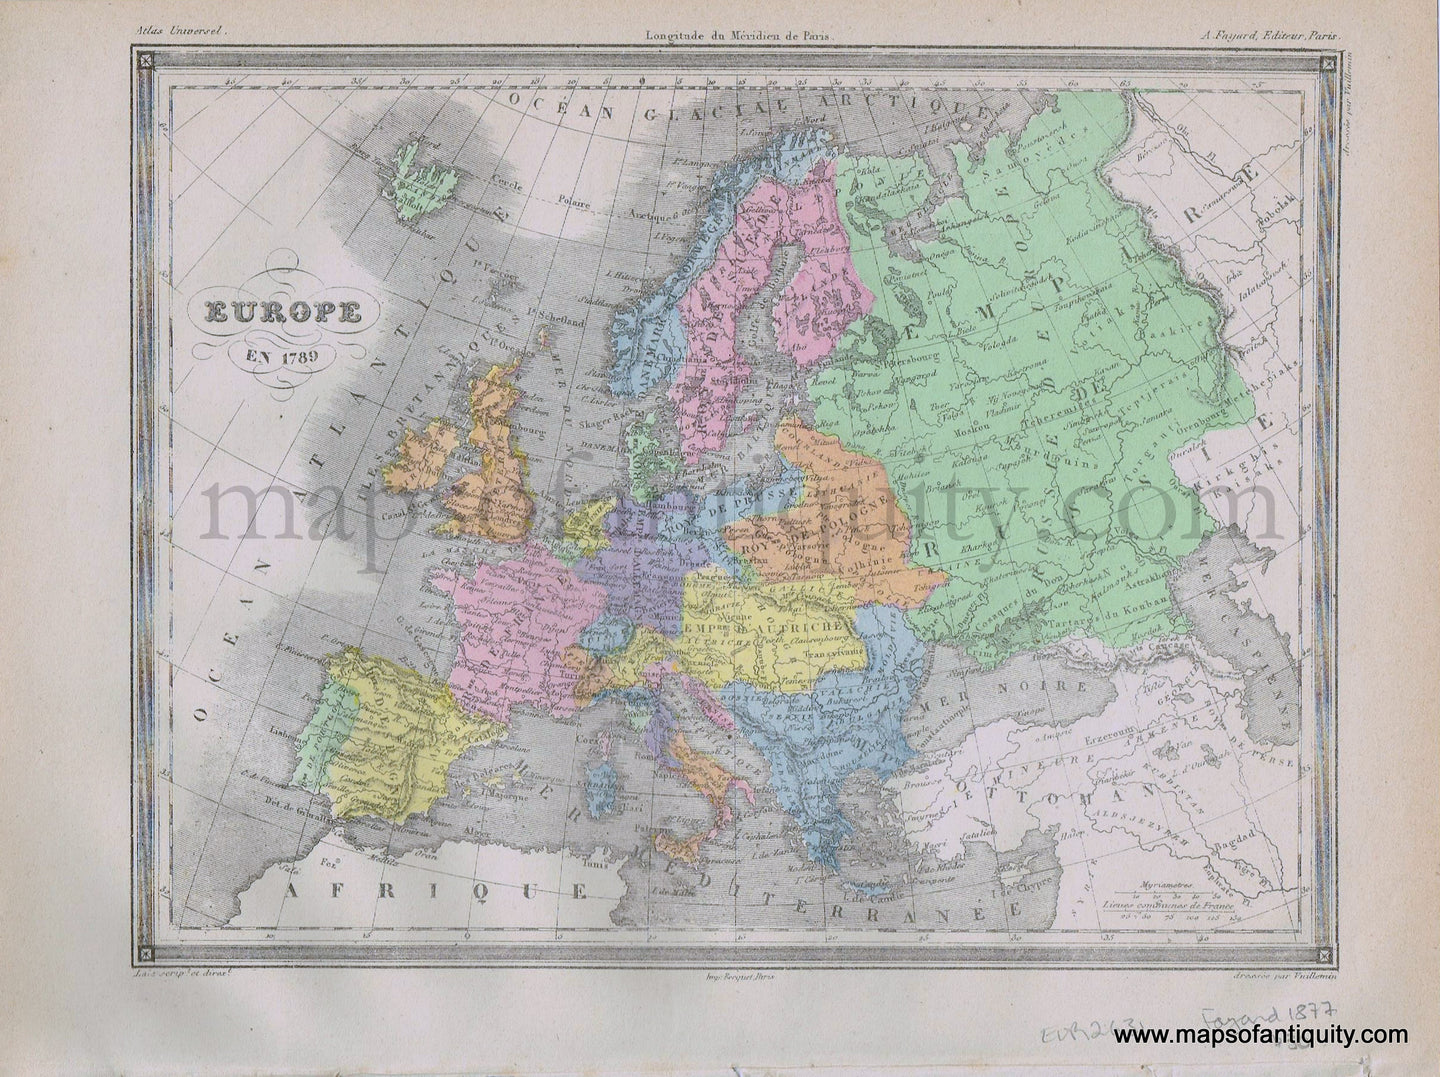 Antique-Printed-Color-Map-Europe-Europe-en-1789-1877-Fayard--1800s-19th-century-Maps-of-Antiquity